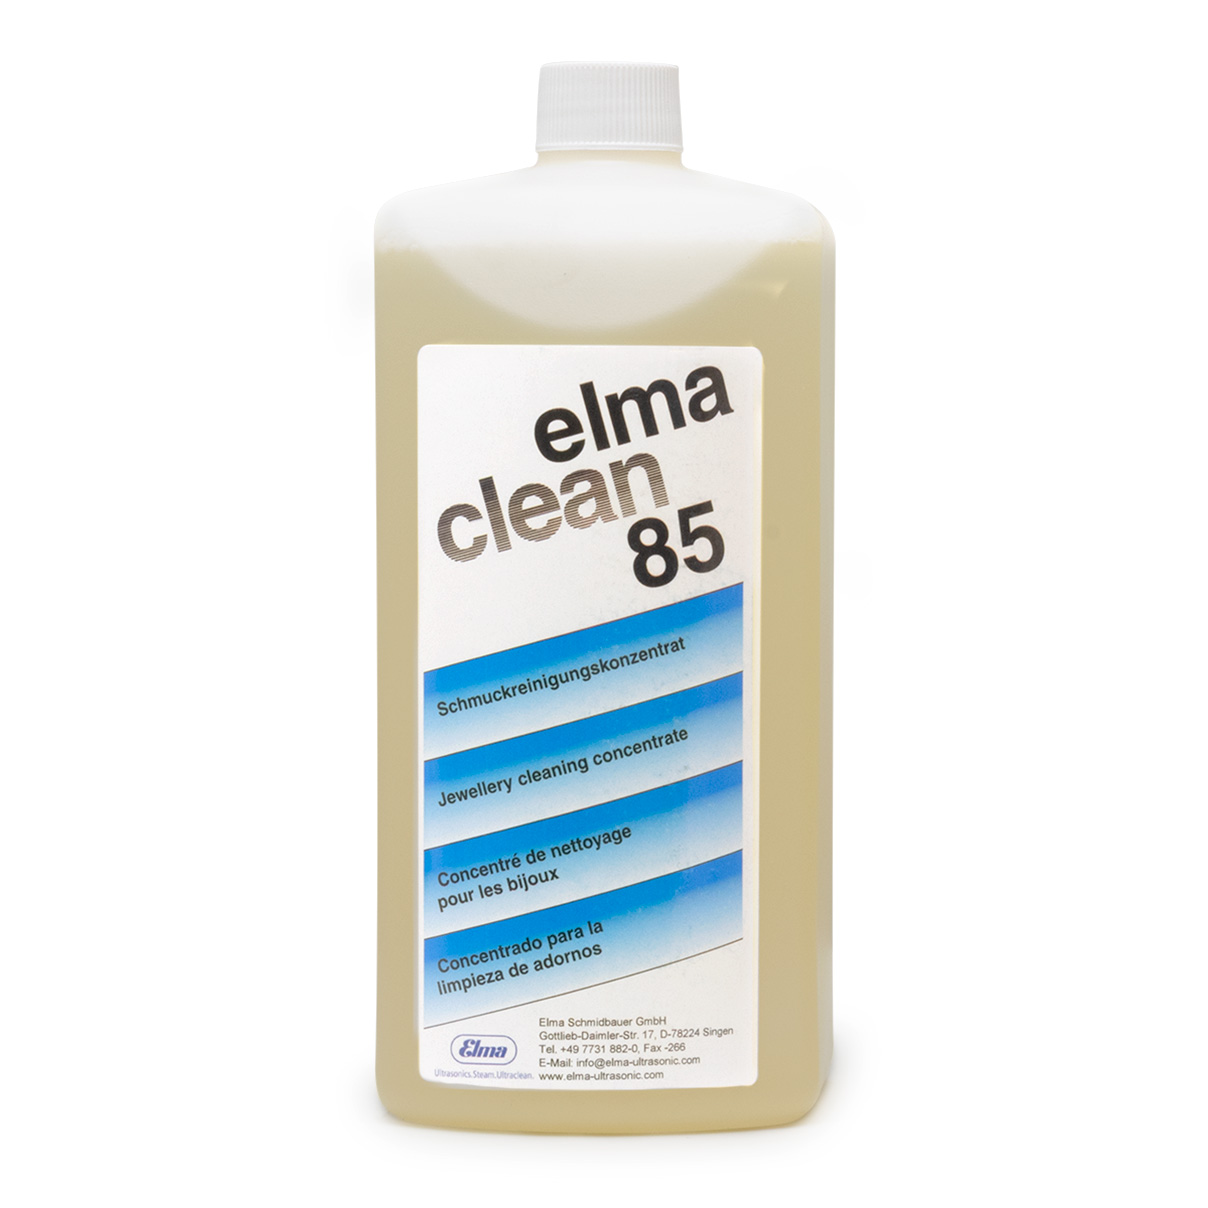 Elma Clean 85 concentrate for jewelry, 1 l